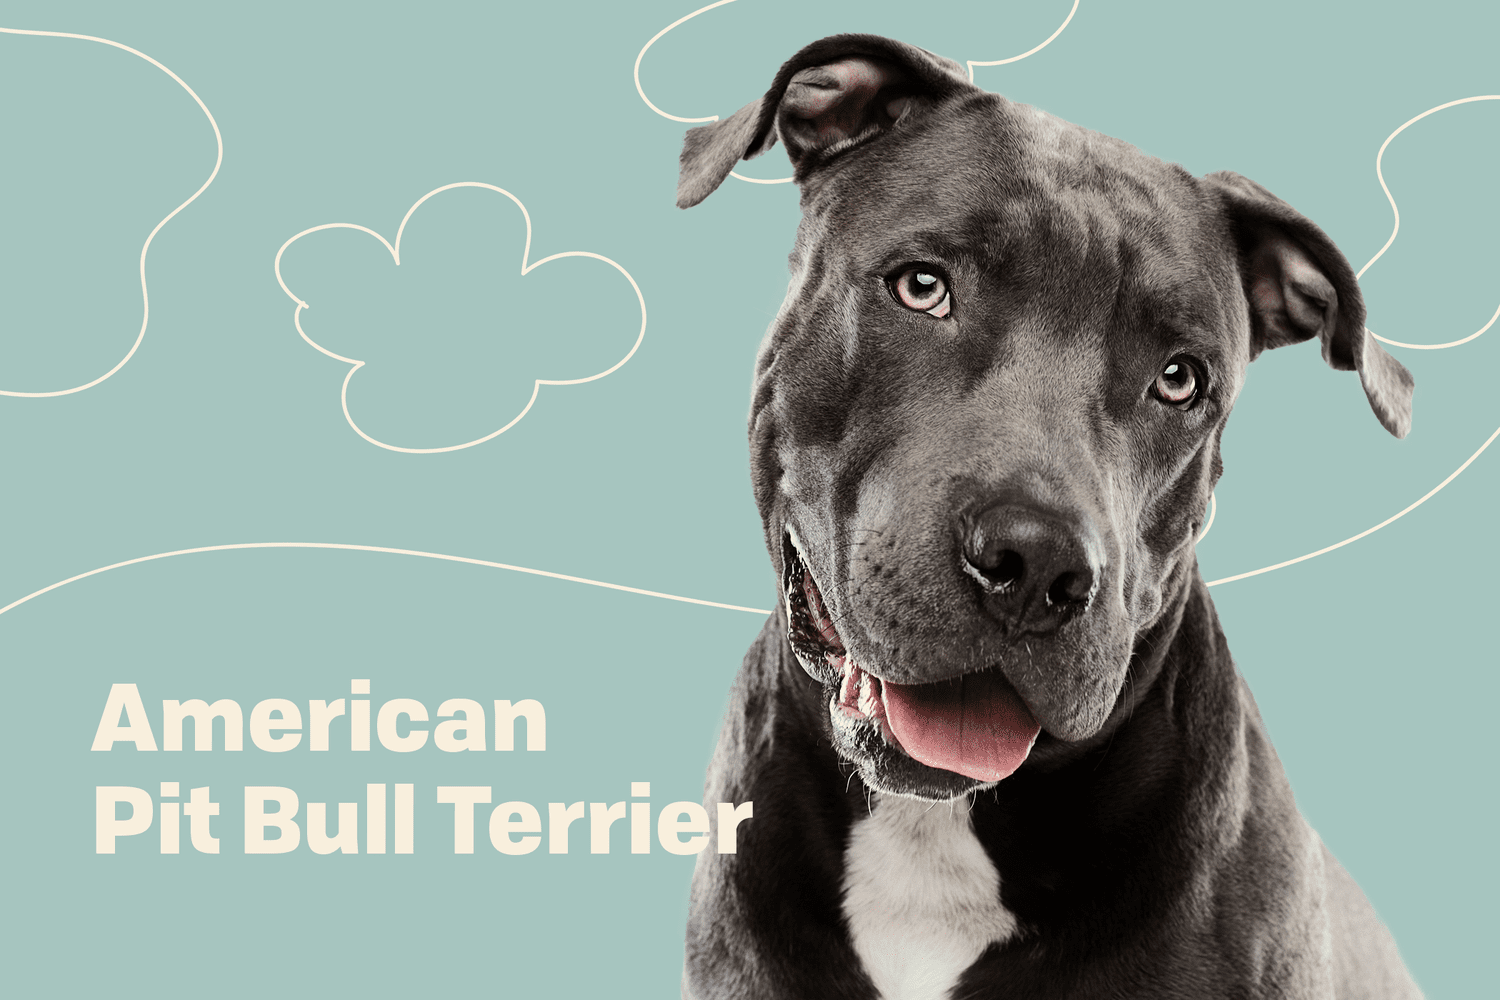 Exploring the Diversity: 5 Types of Pit Bull Dog Breeds